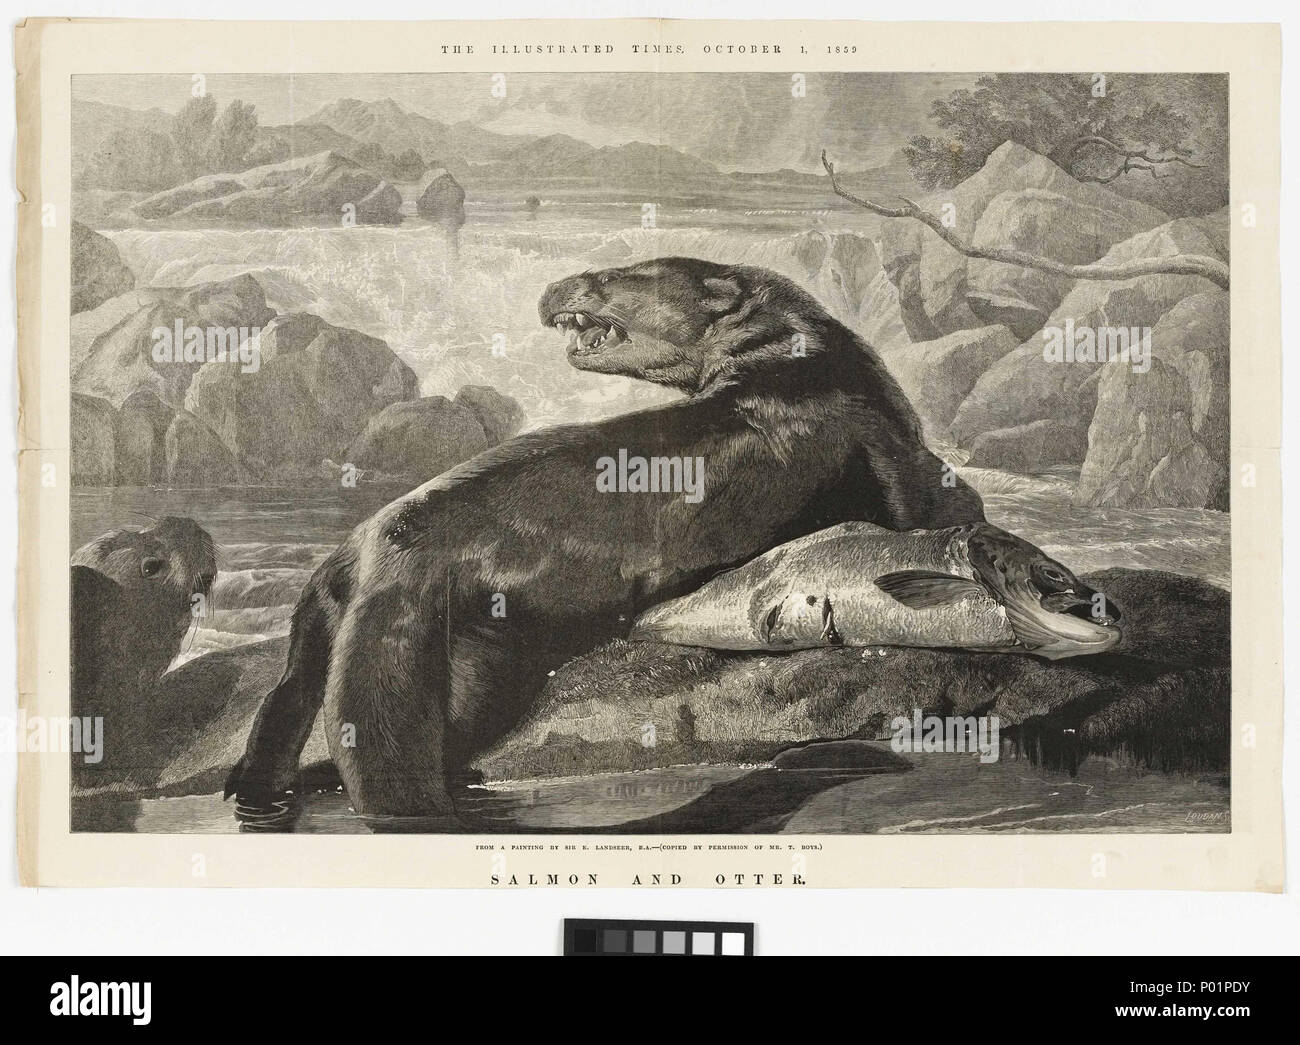 .  English: 'Salmon and Otter' This print by S. Loudan after a painting by Sir E. Landseer was reproduced in The Illustrated Times on 1 October 1859. It shows an otter lying across the salmon it has just caught. They are by a waterfall with rocks on either side. The otter and salmon are on a grassy bank with the otter's tail still in the water. The Herschels prints and drawing collection becomes increasingly drawn from illustrations extracted from one of the many illustrated newspapers on the market from the second half of the 19th century onward. 'Salmon and Otter'  . 1 October 1859. S. Louda Stock Photo